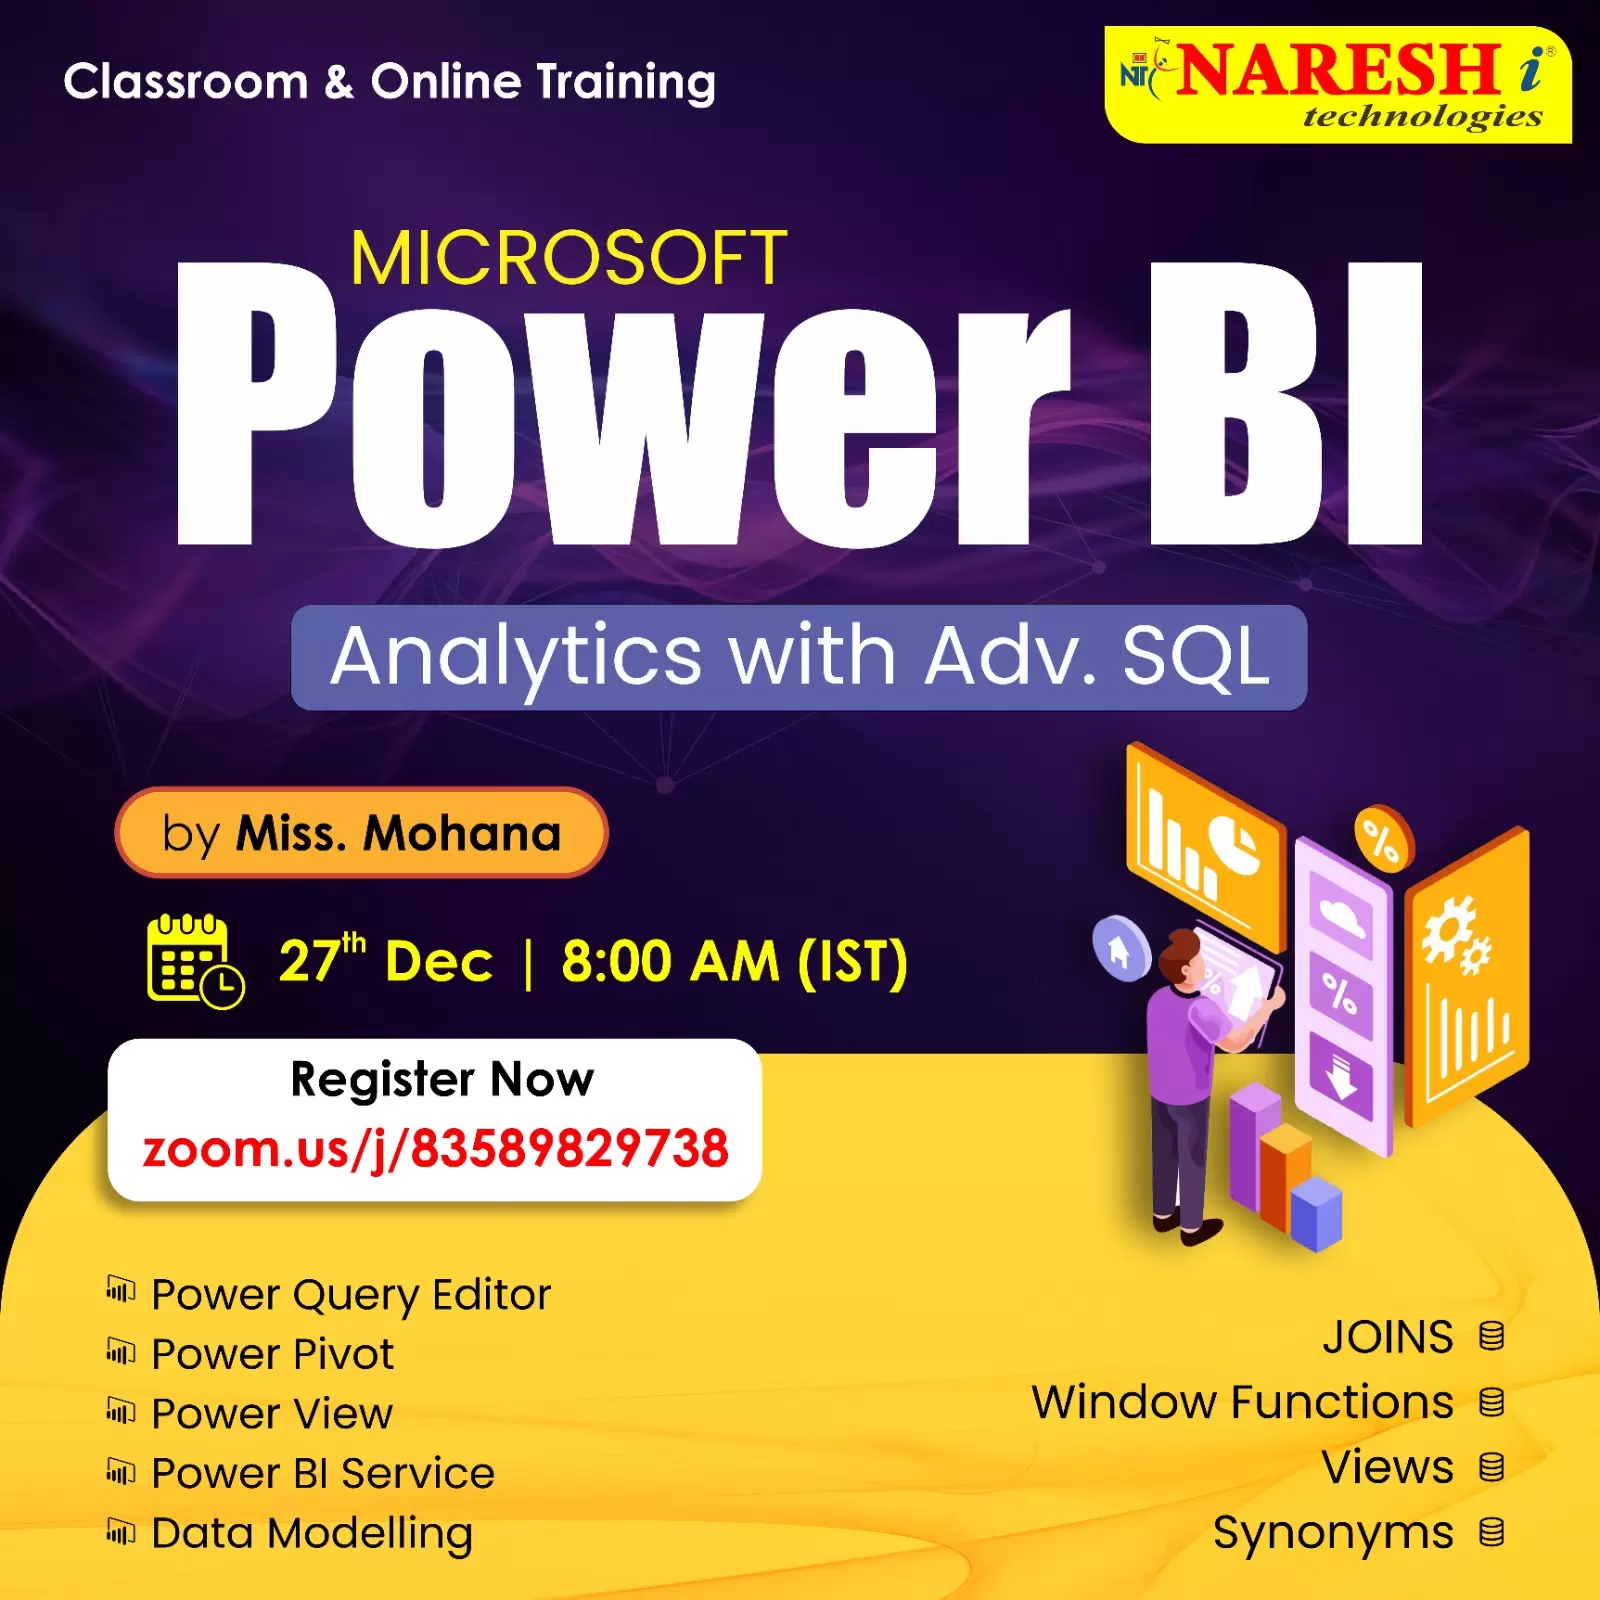 Power BI by Miss. Mohana Online Course Training in NareshIT